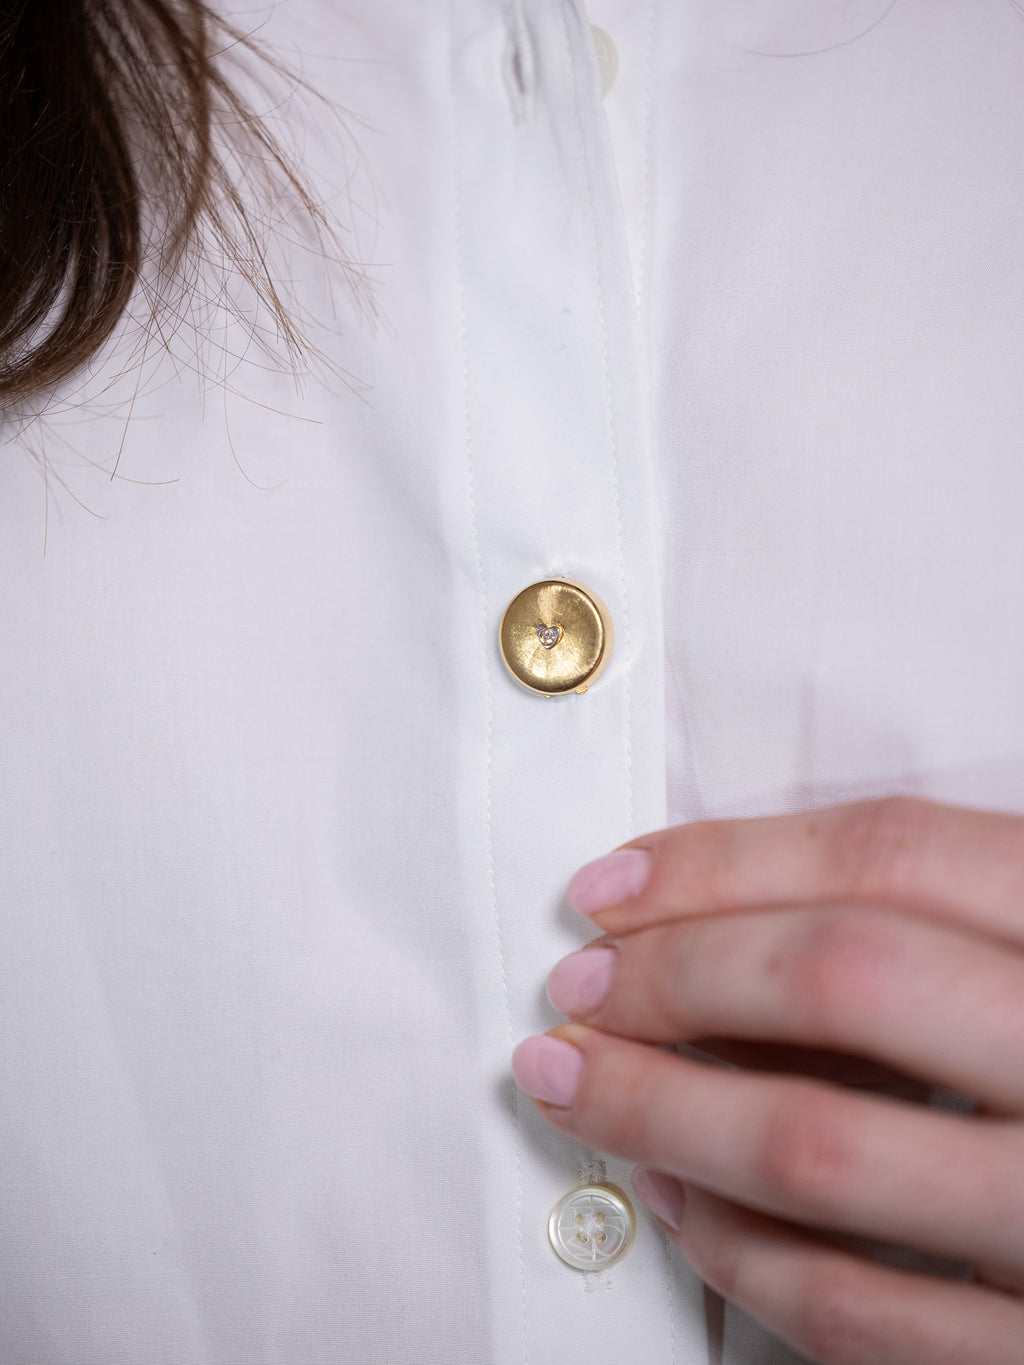 Gold button cover with single diamond on white shirt.